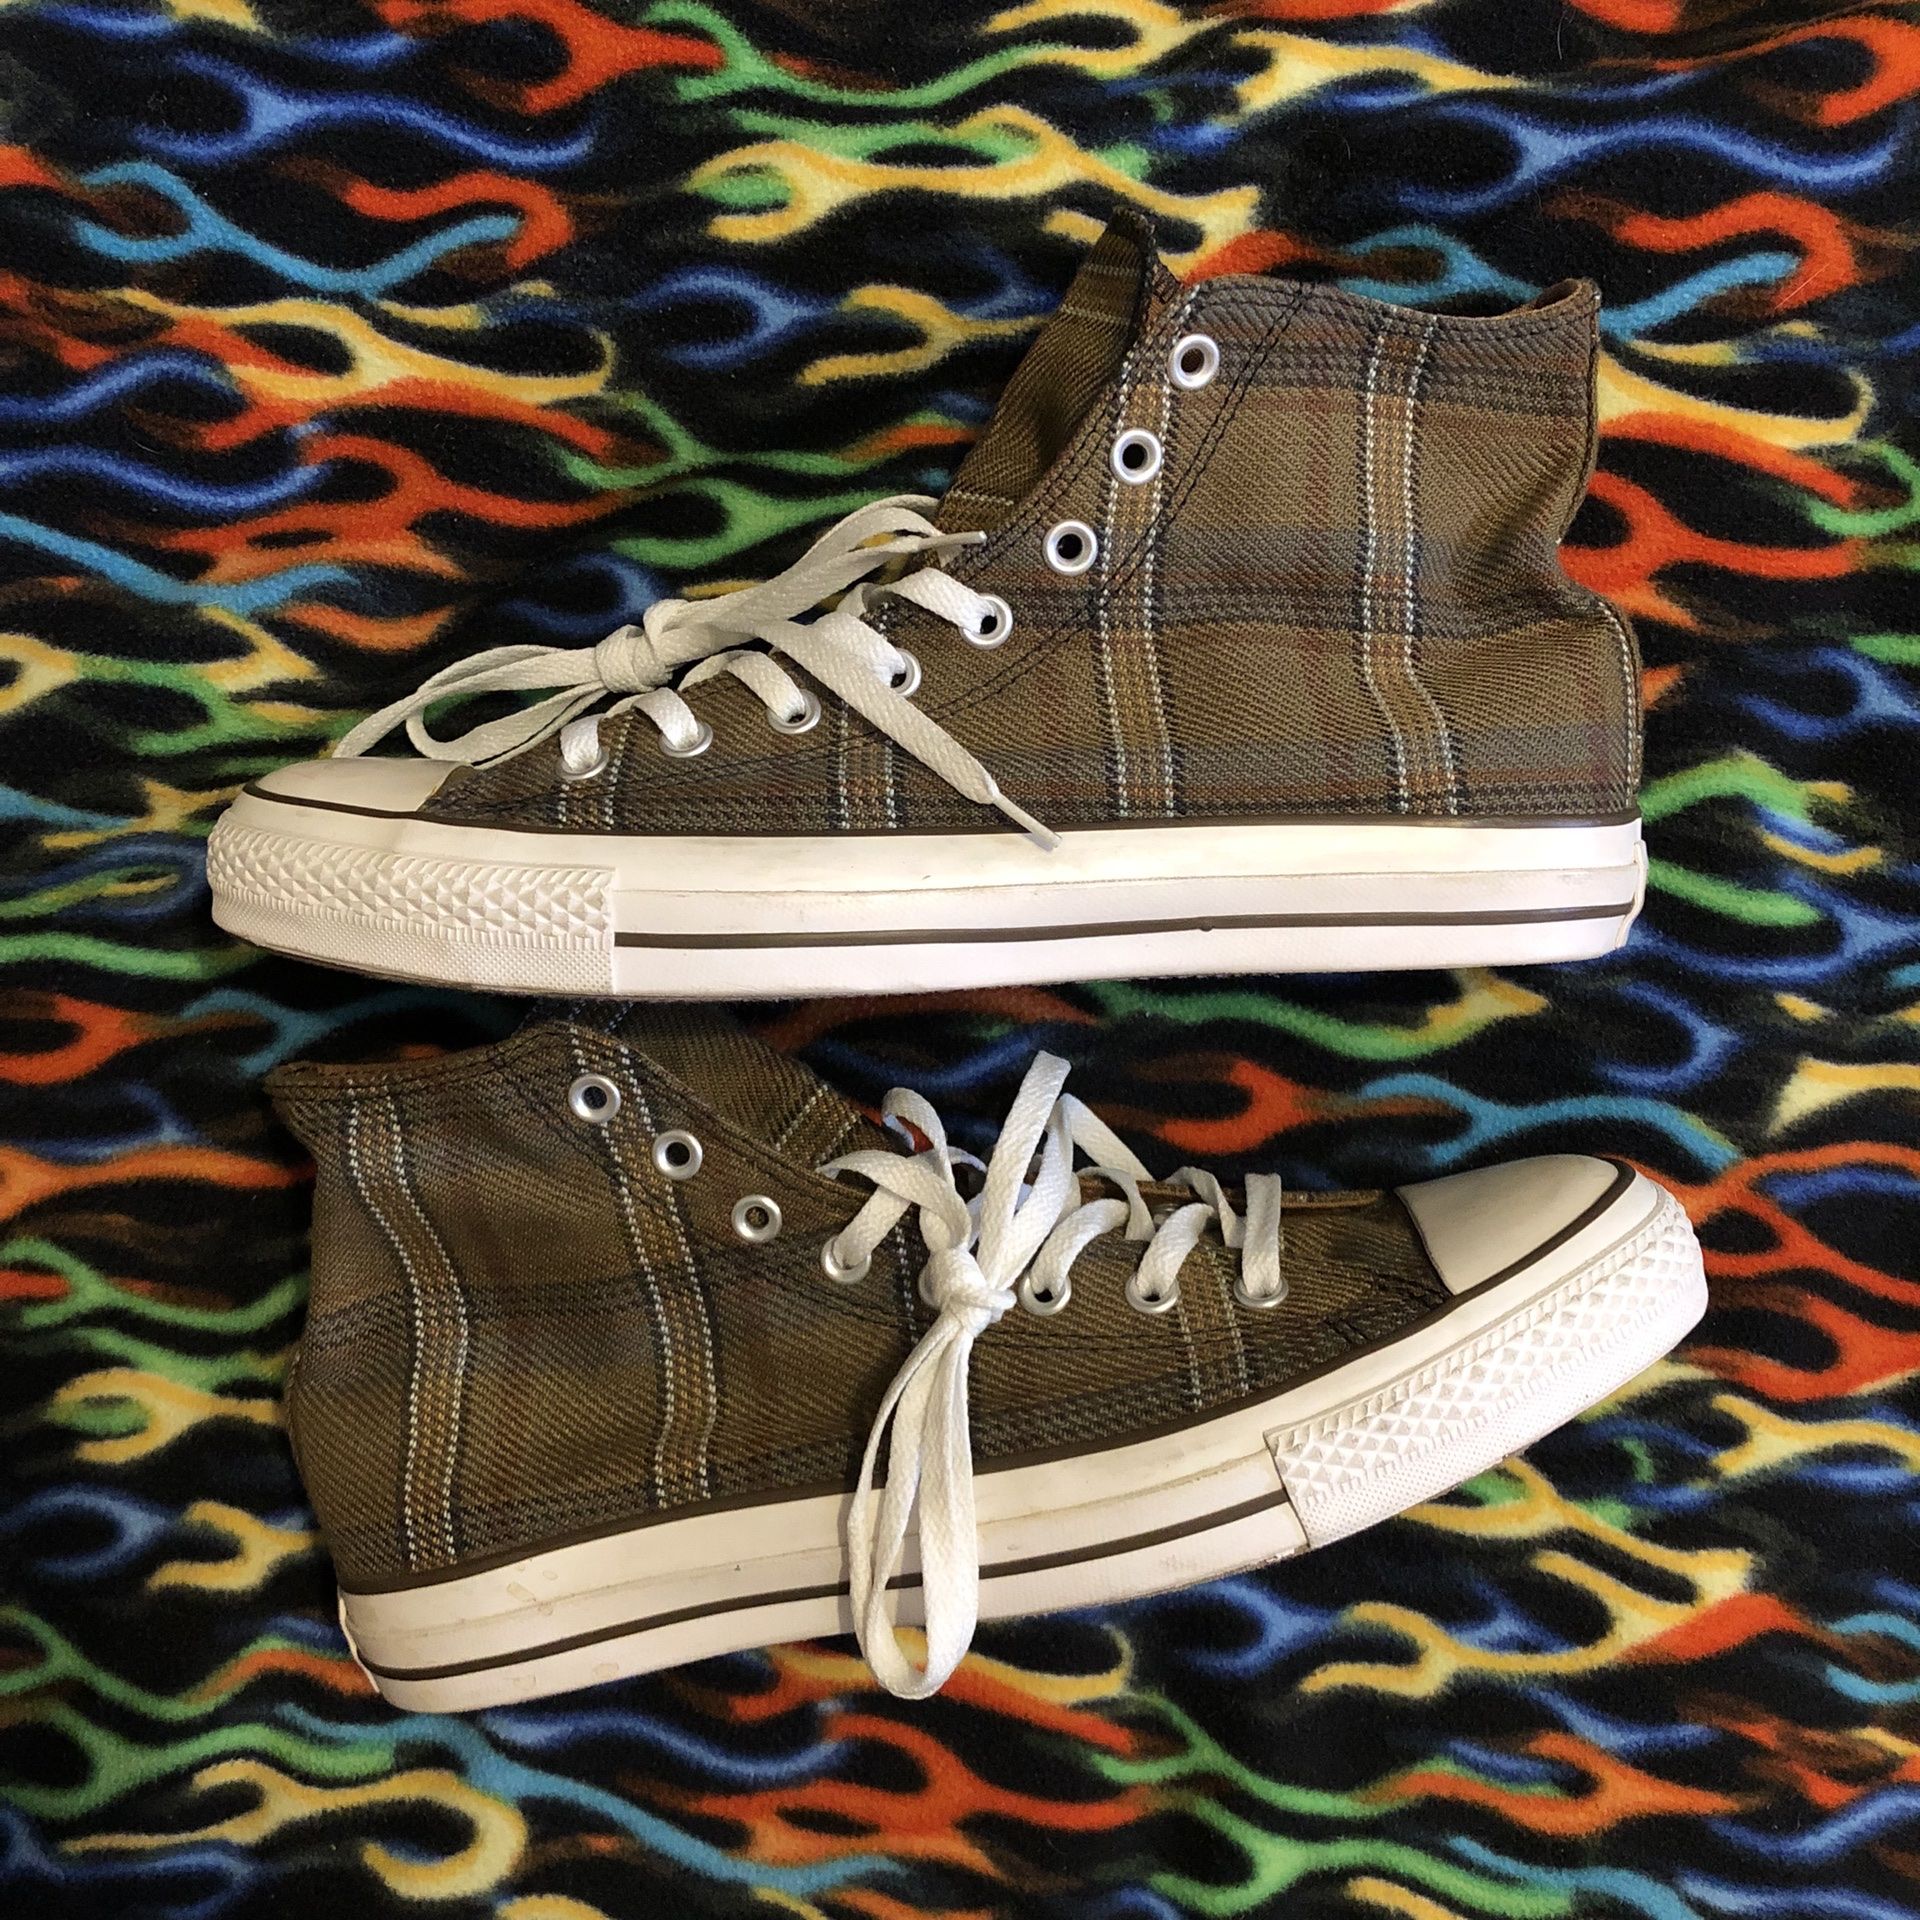 Vintage plaid flannel converse chuck Taylor all high sneaker. 11 for Sale in Irwindale, CA - OfferUp